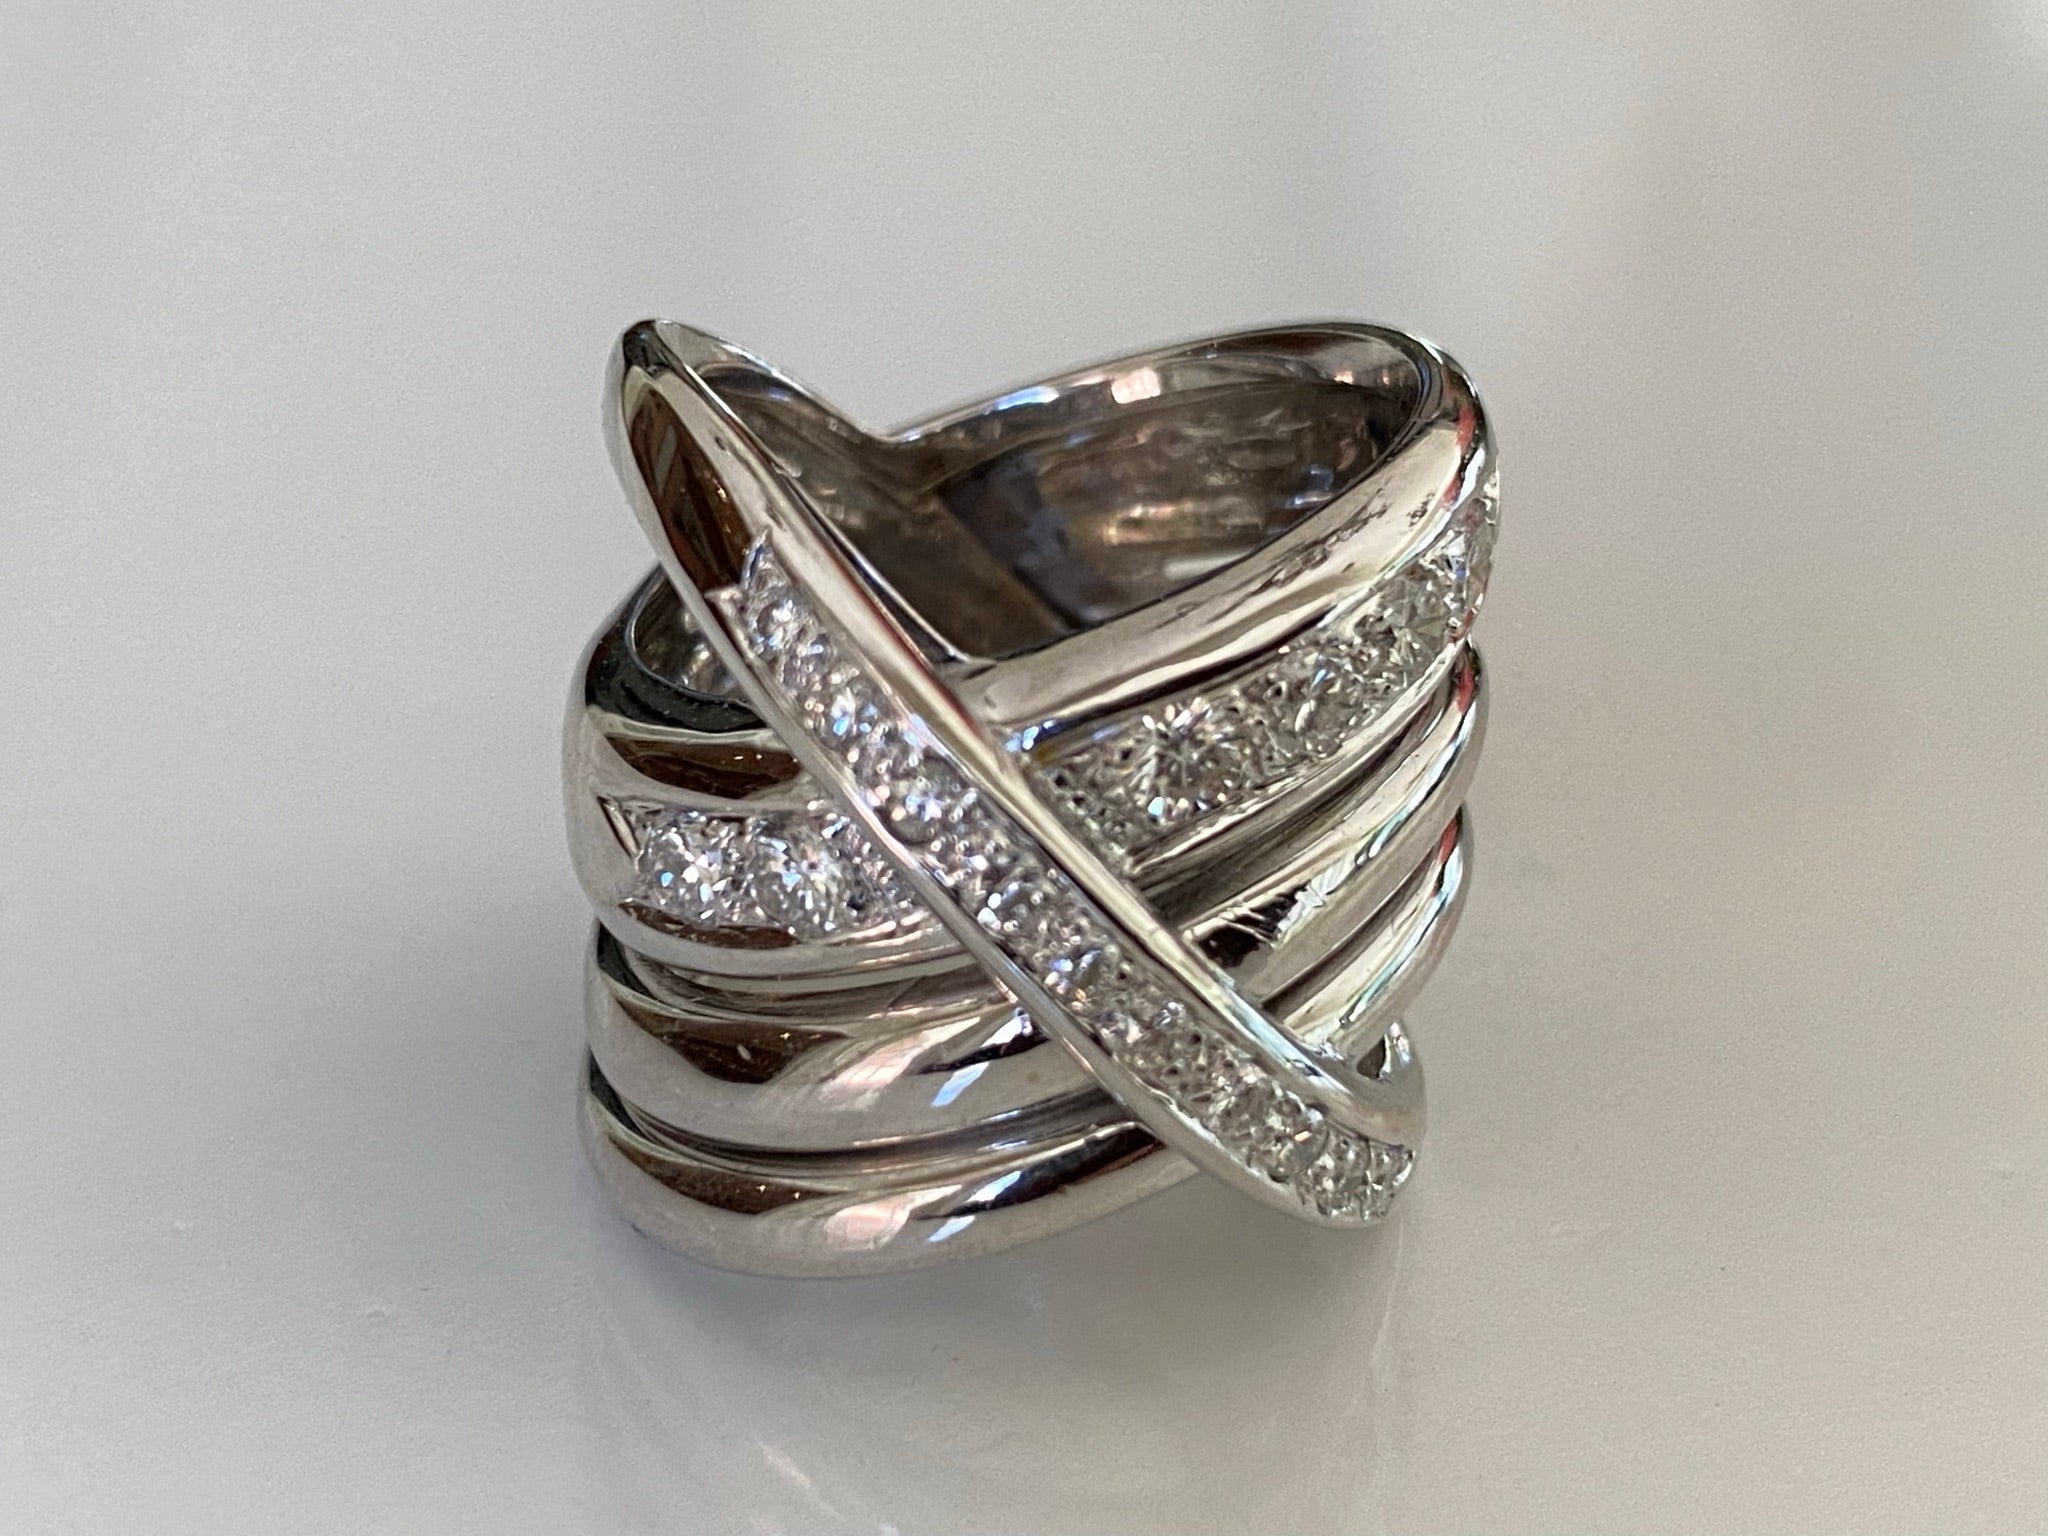 This bold fashion ring crafted in 18kt white gold features a coiled, crisscross design studded with approximately 1.30 carats of fine round diamonds. Signed Maria Grazia Cassetti